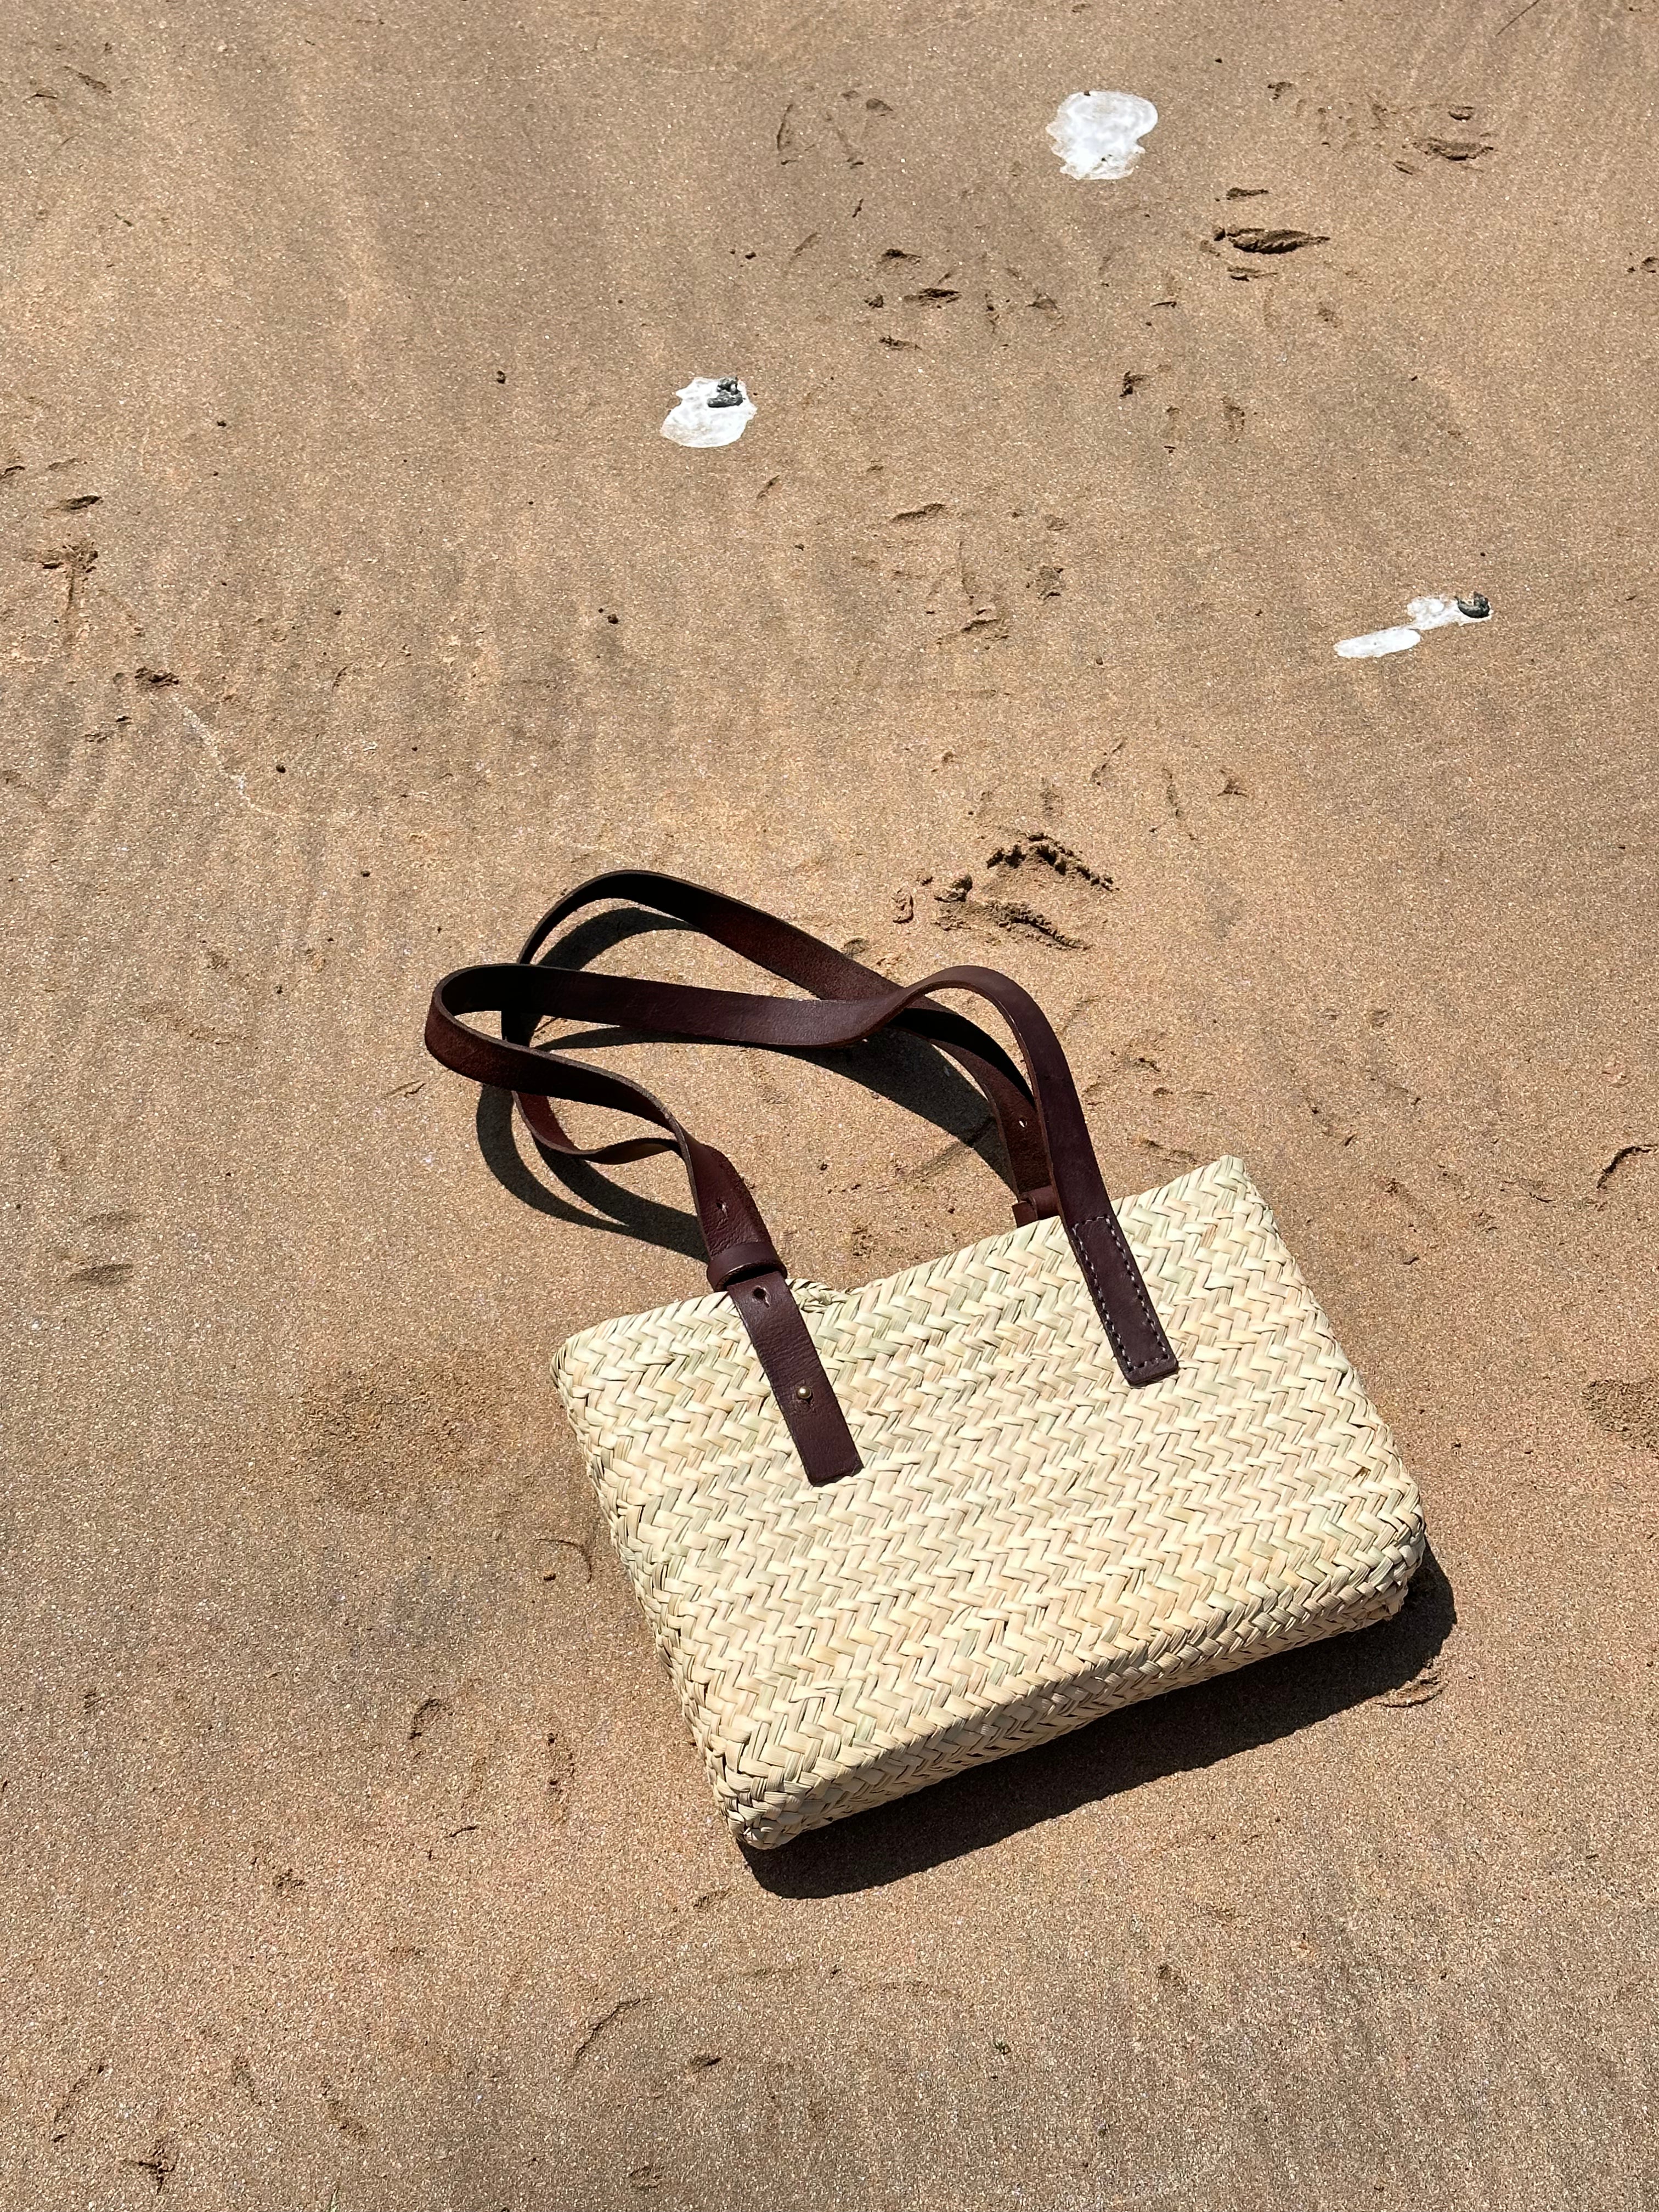 Handwoven Straw Clutch Bag With leather shoulder Strap